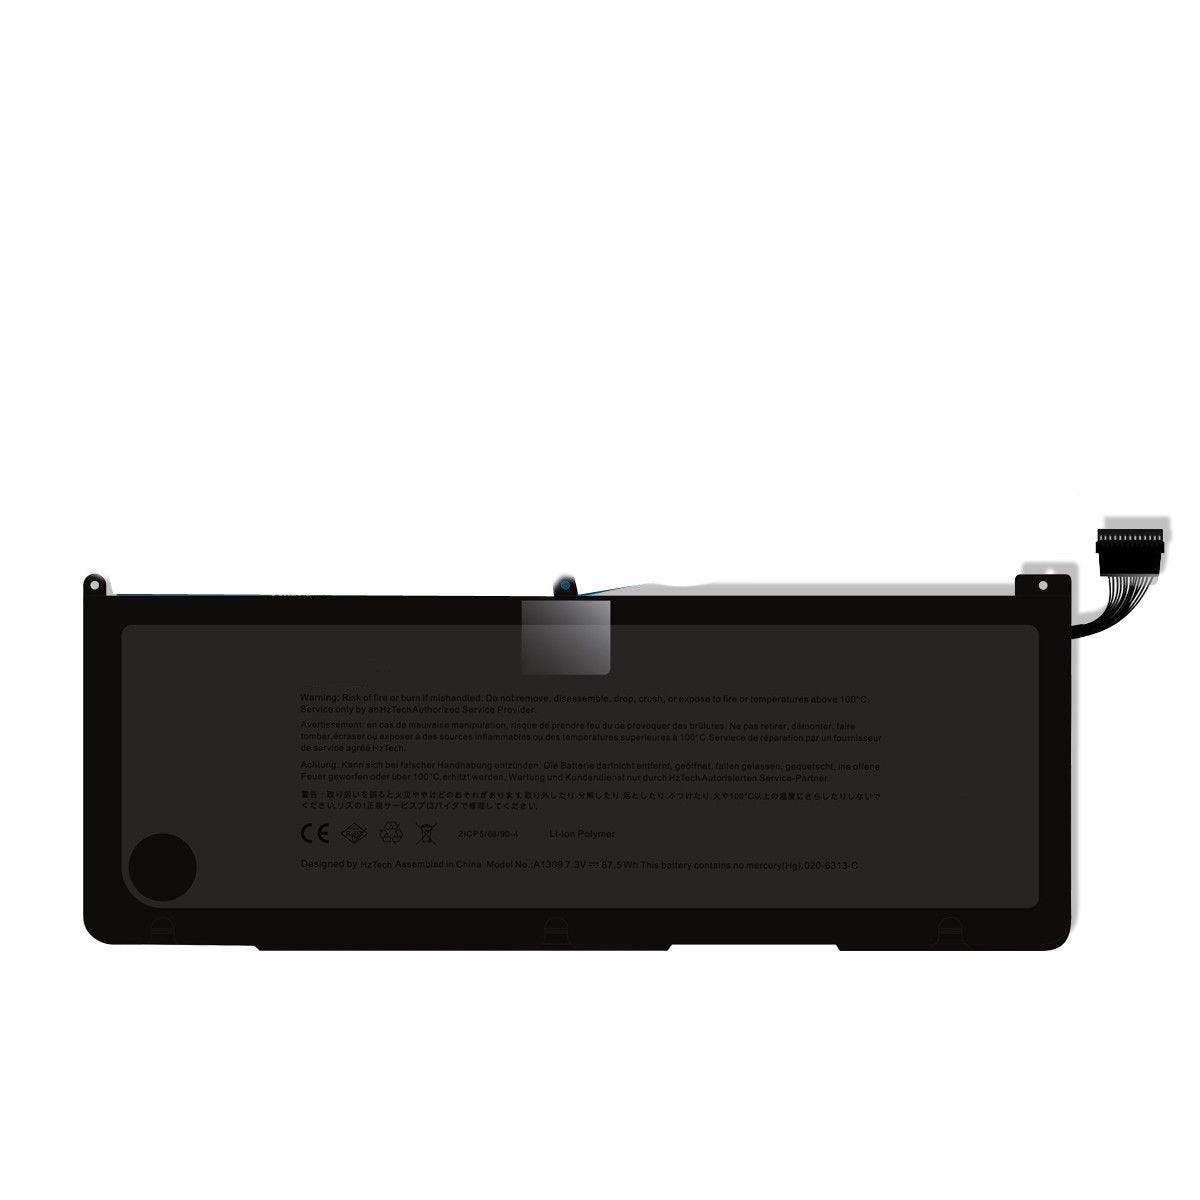 Laptop Battery for Apple MacBook A1297 2009 2010 A1309 661-5037 661-5535 020-6313-C 593-1240-A